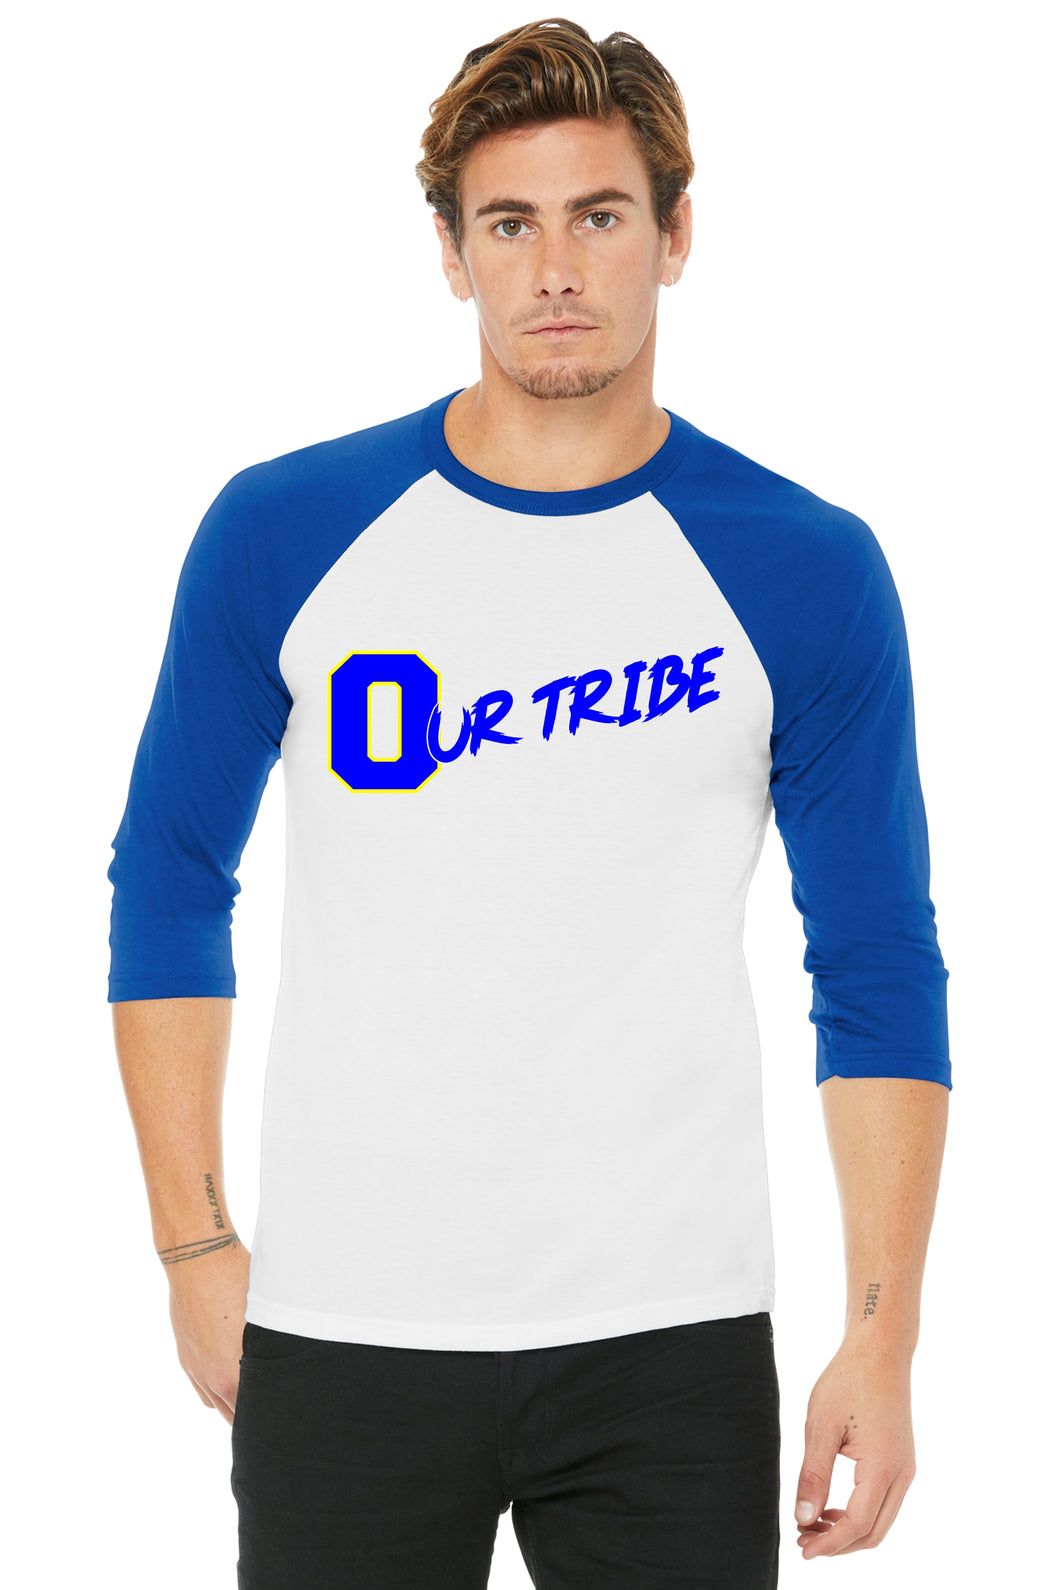 Our Tribe White and Blue Unisex